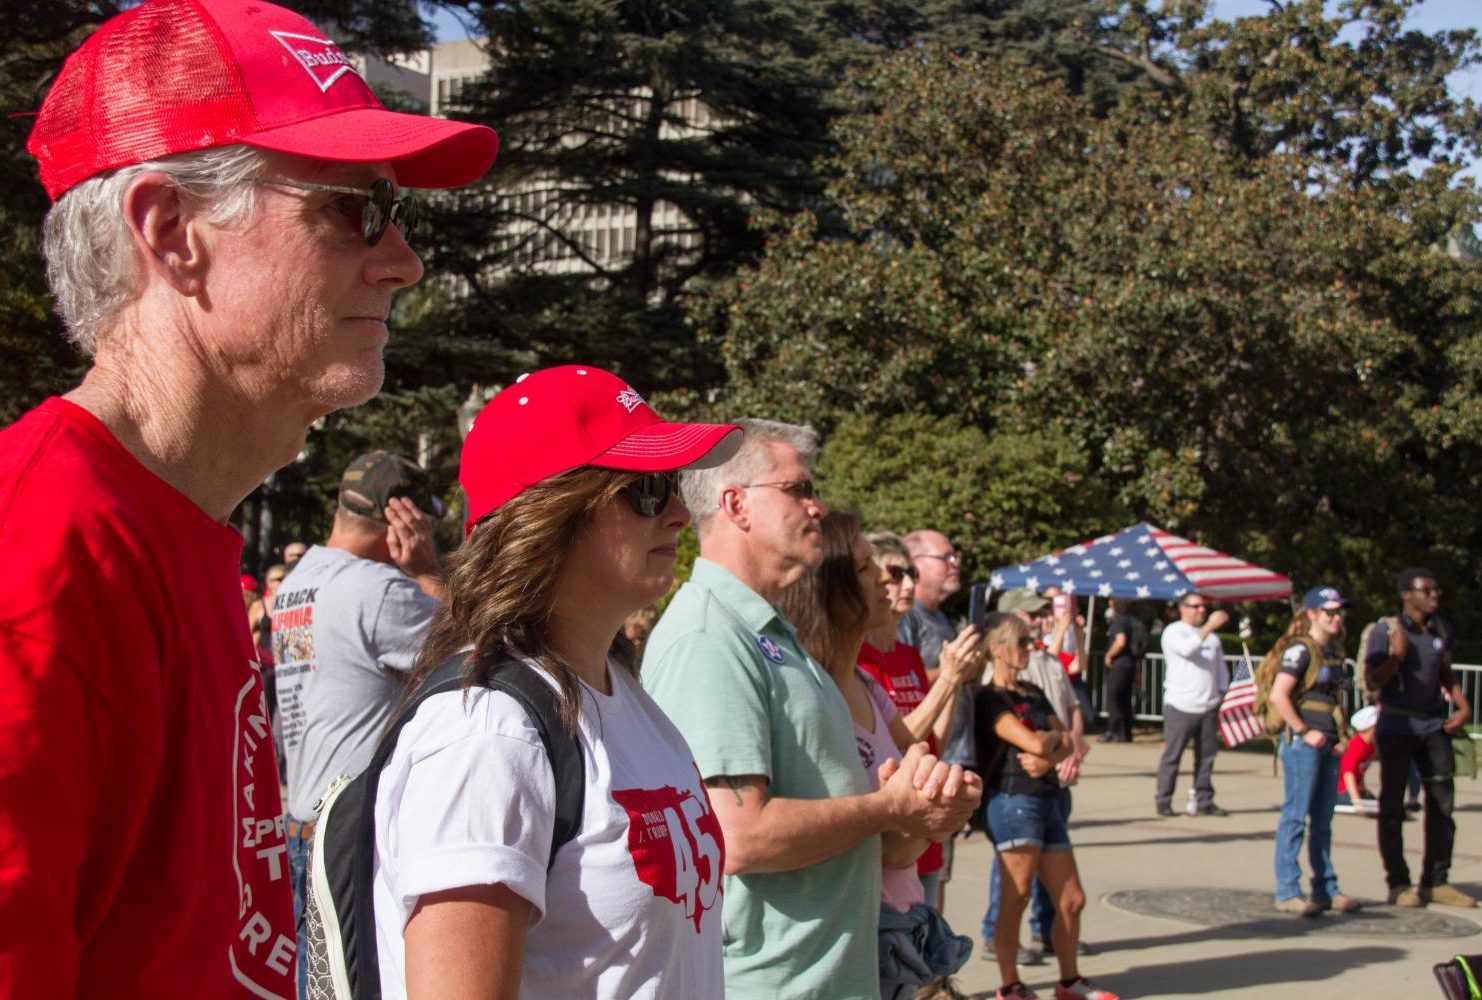 Trump supporters at a “Turn California Red” conservative rally at the California State Capitol in Sacramento on Nov. 4, 2018. (Photo by Patrick Hyun Wilson)